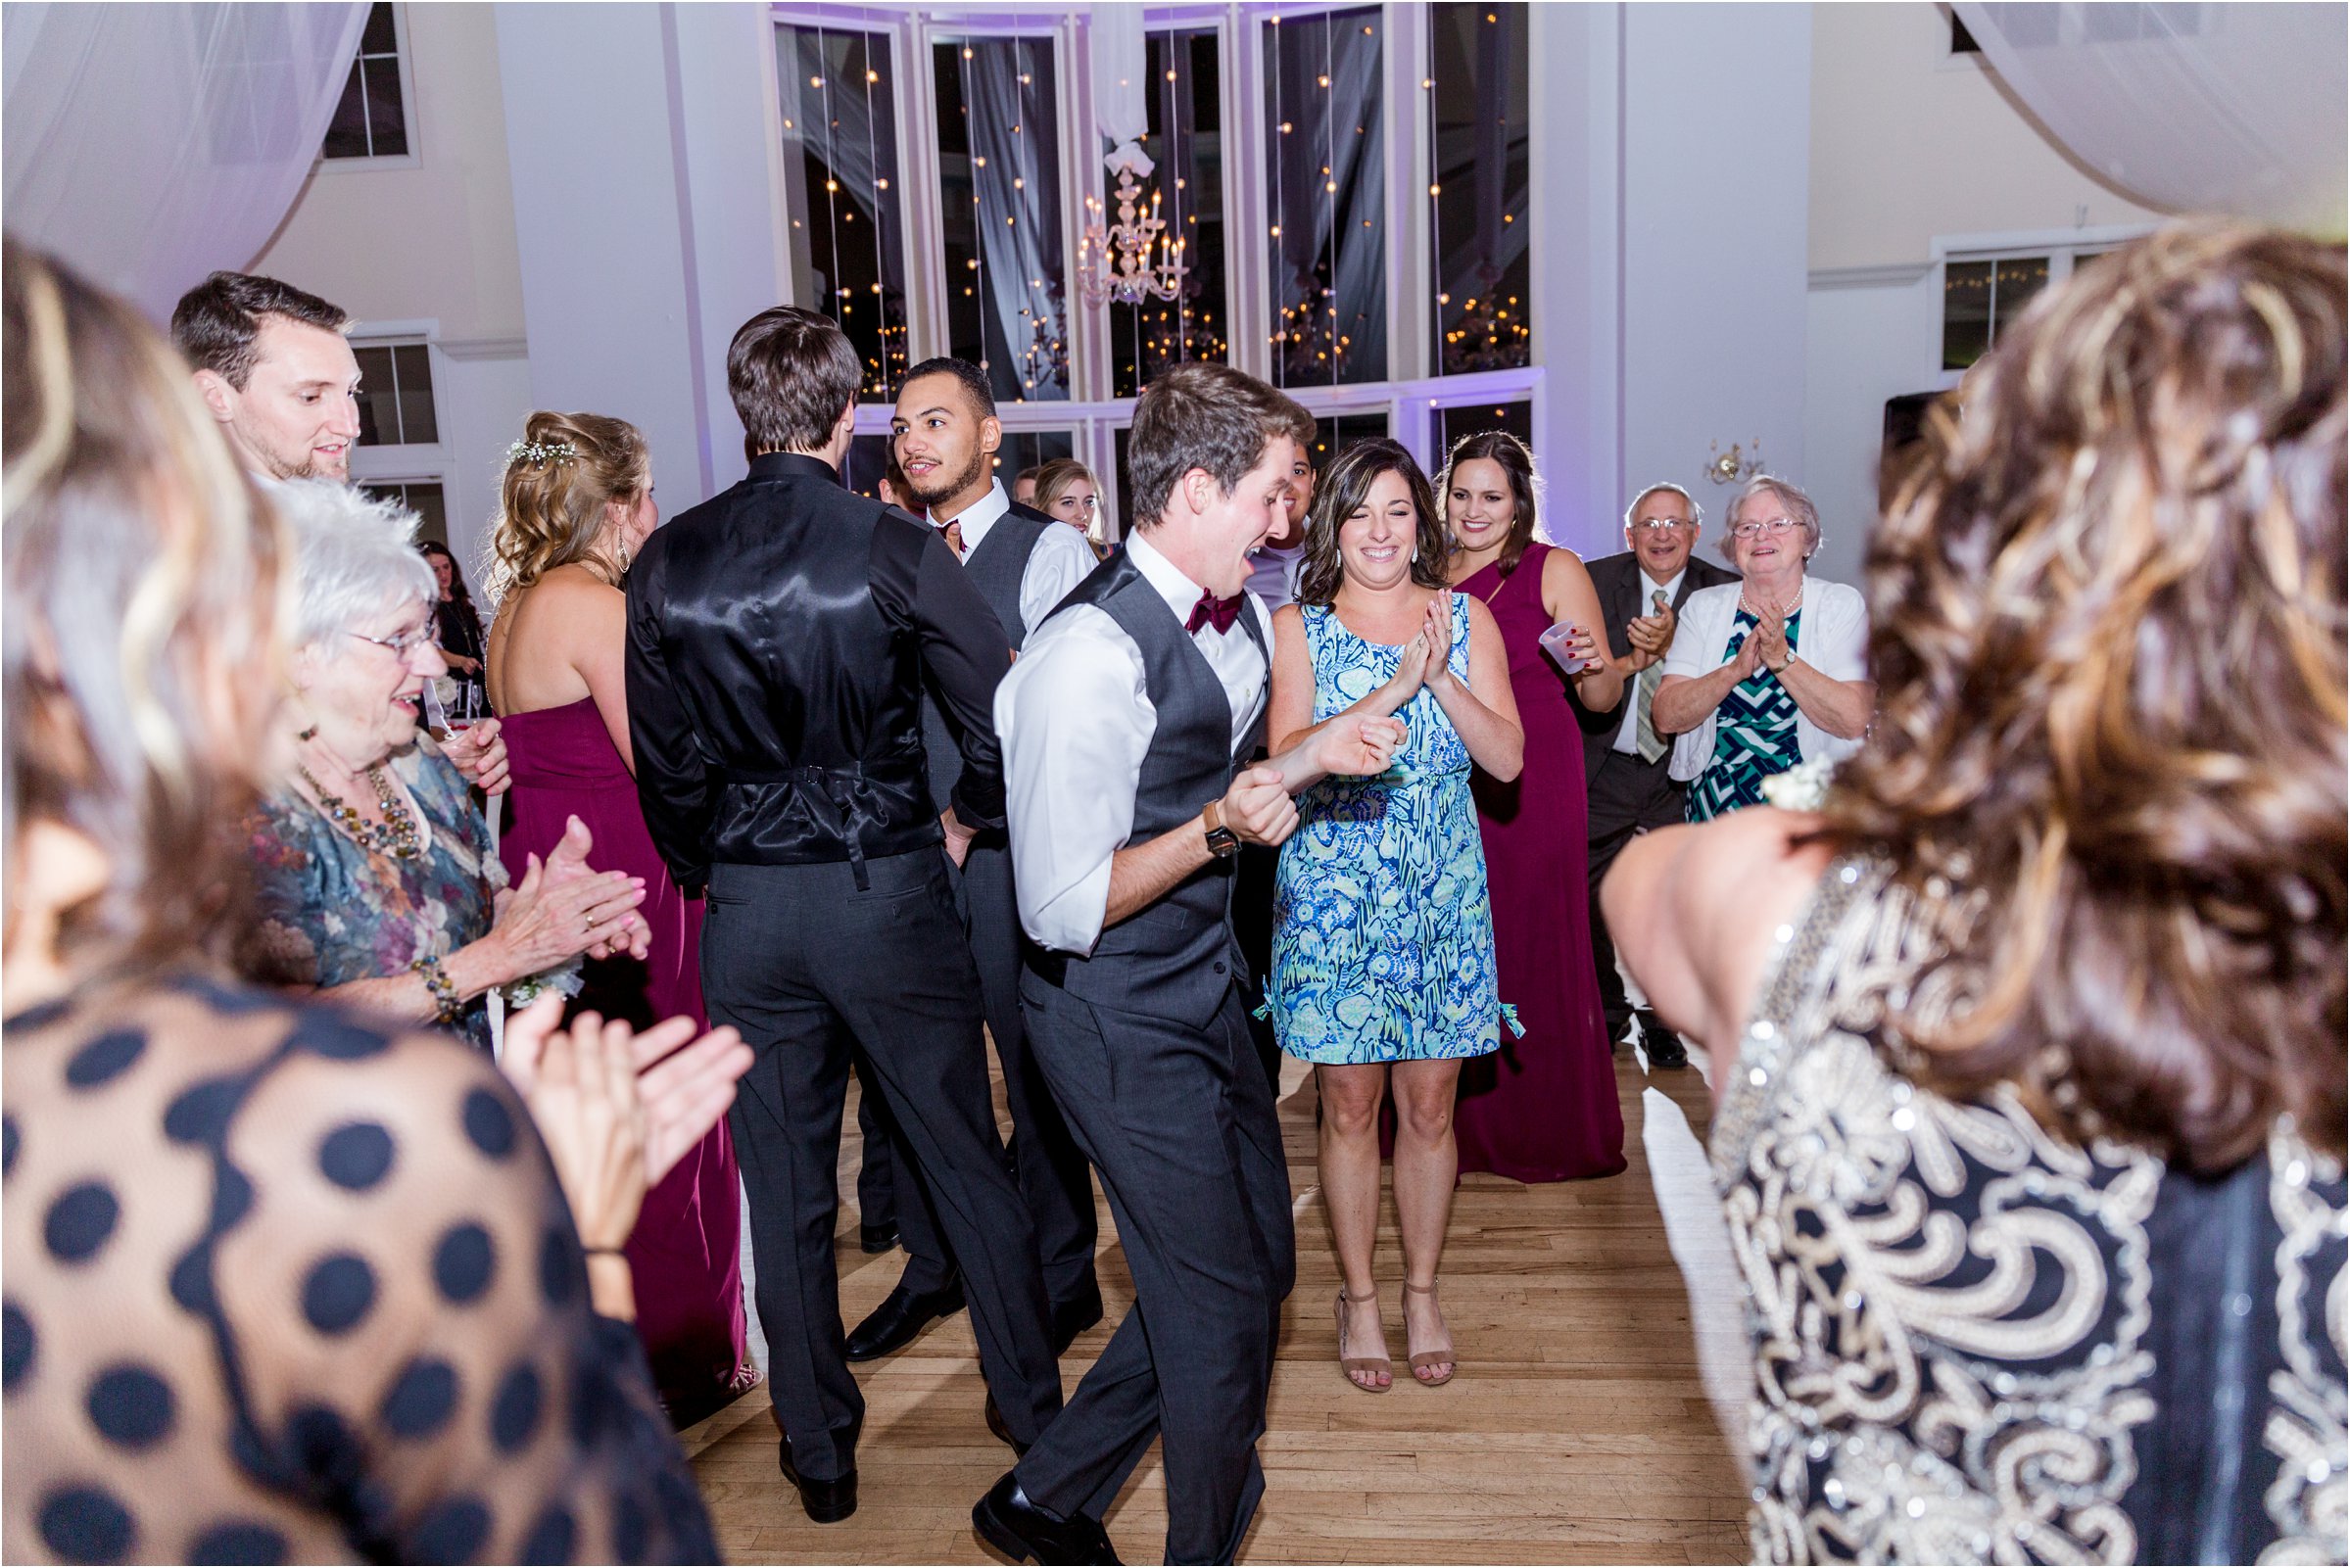 guests dance at wedding as bride and groom dance together